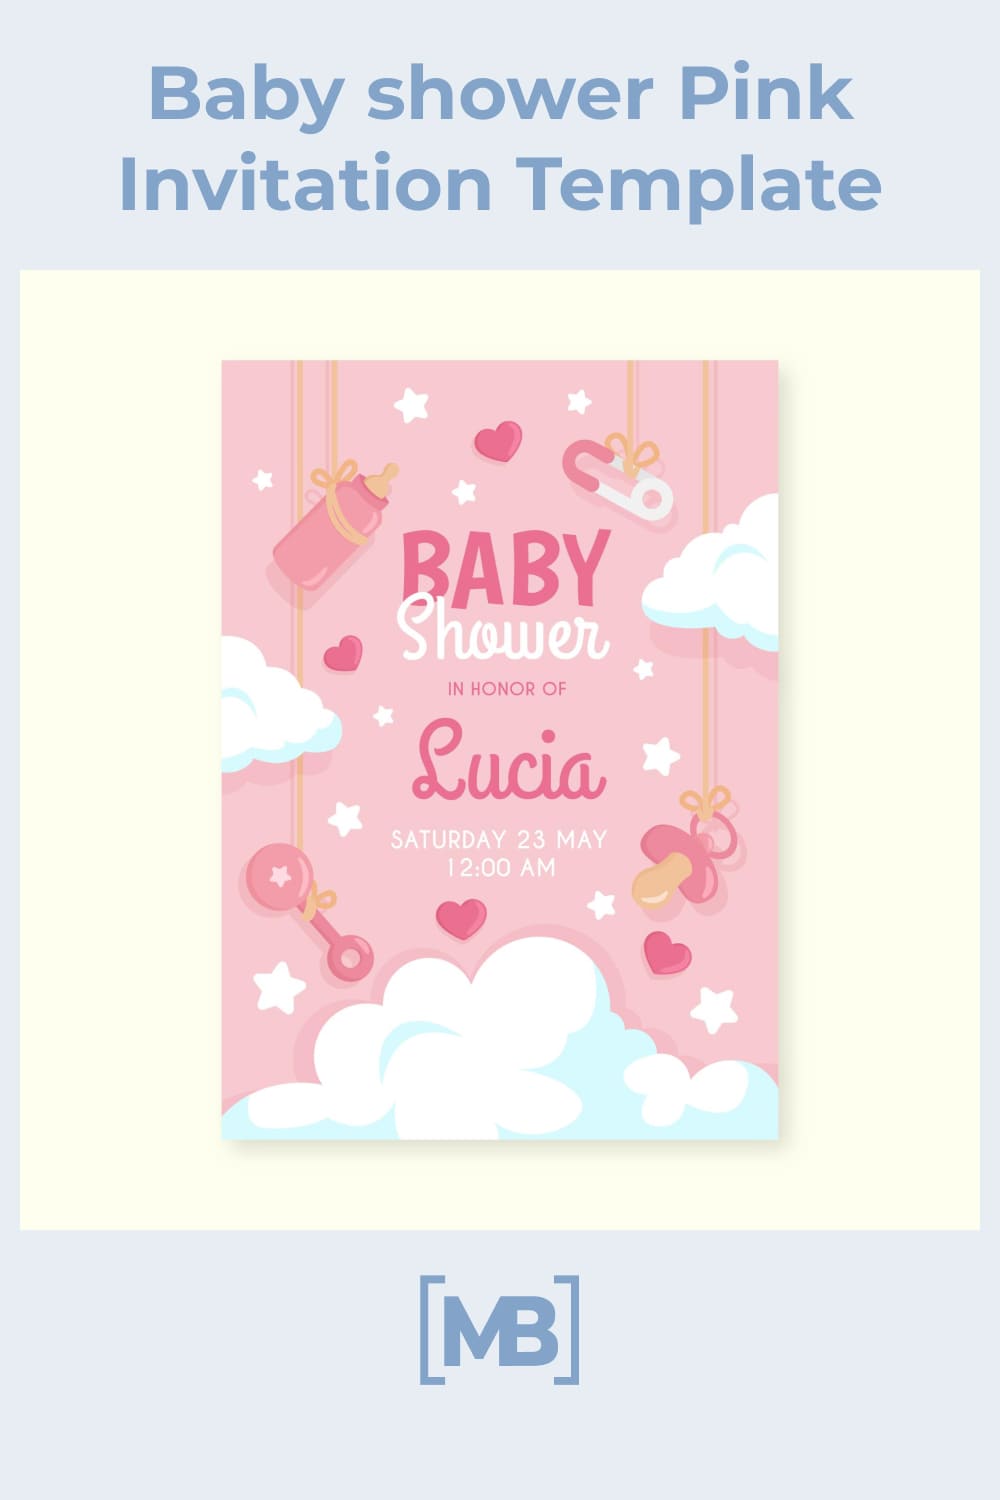 Gentle pink invitation with baby attributes.